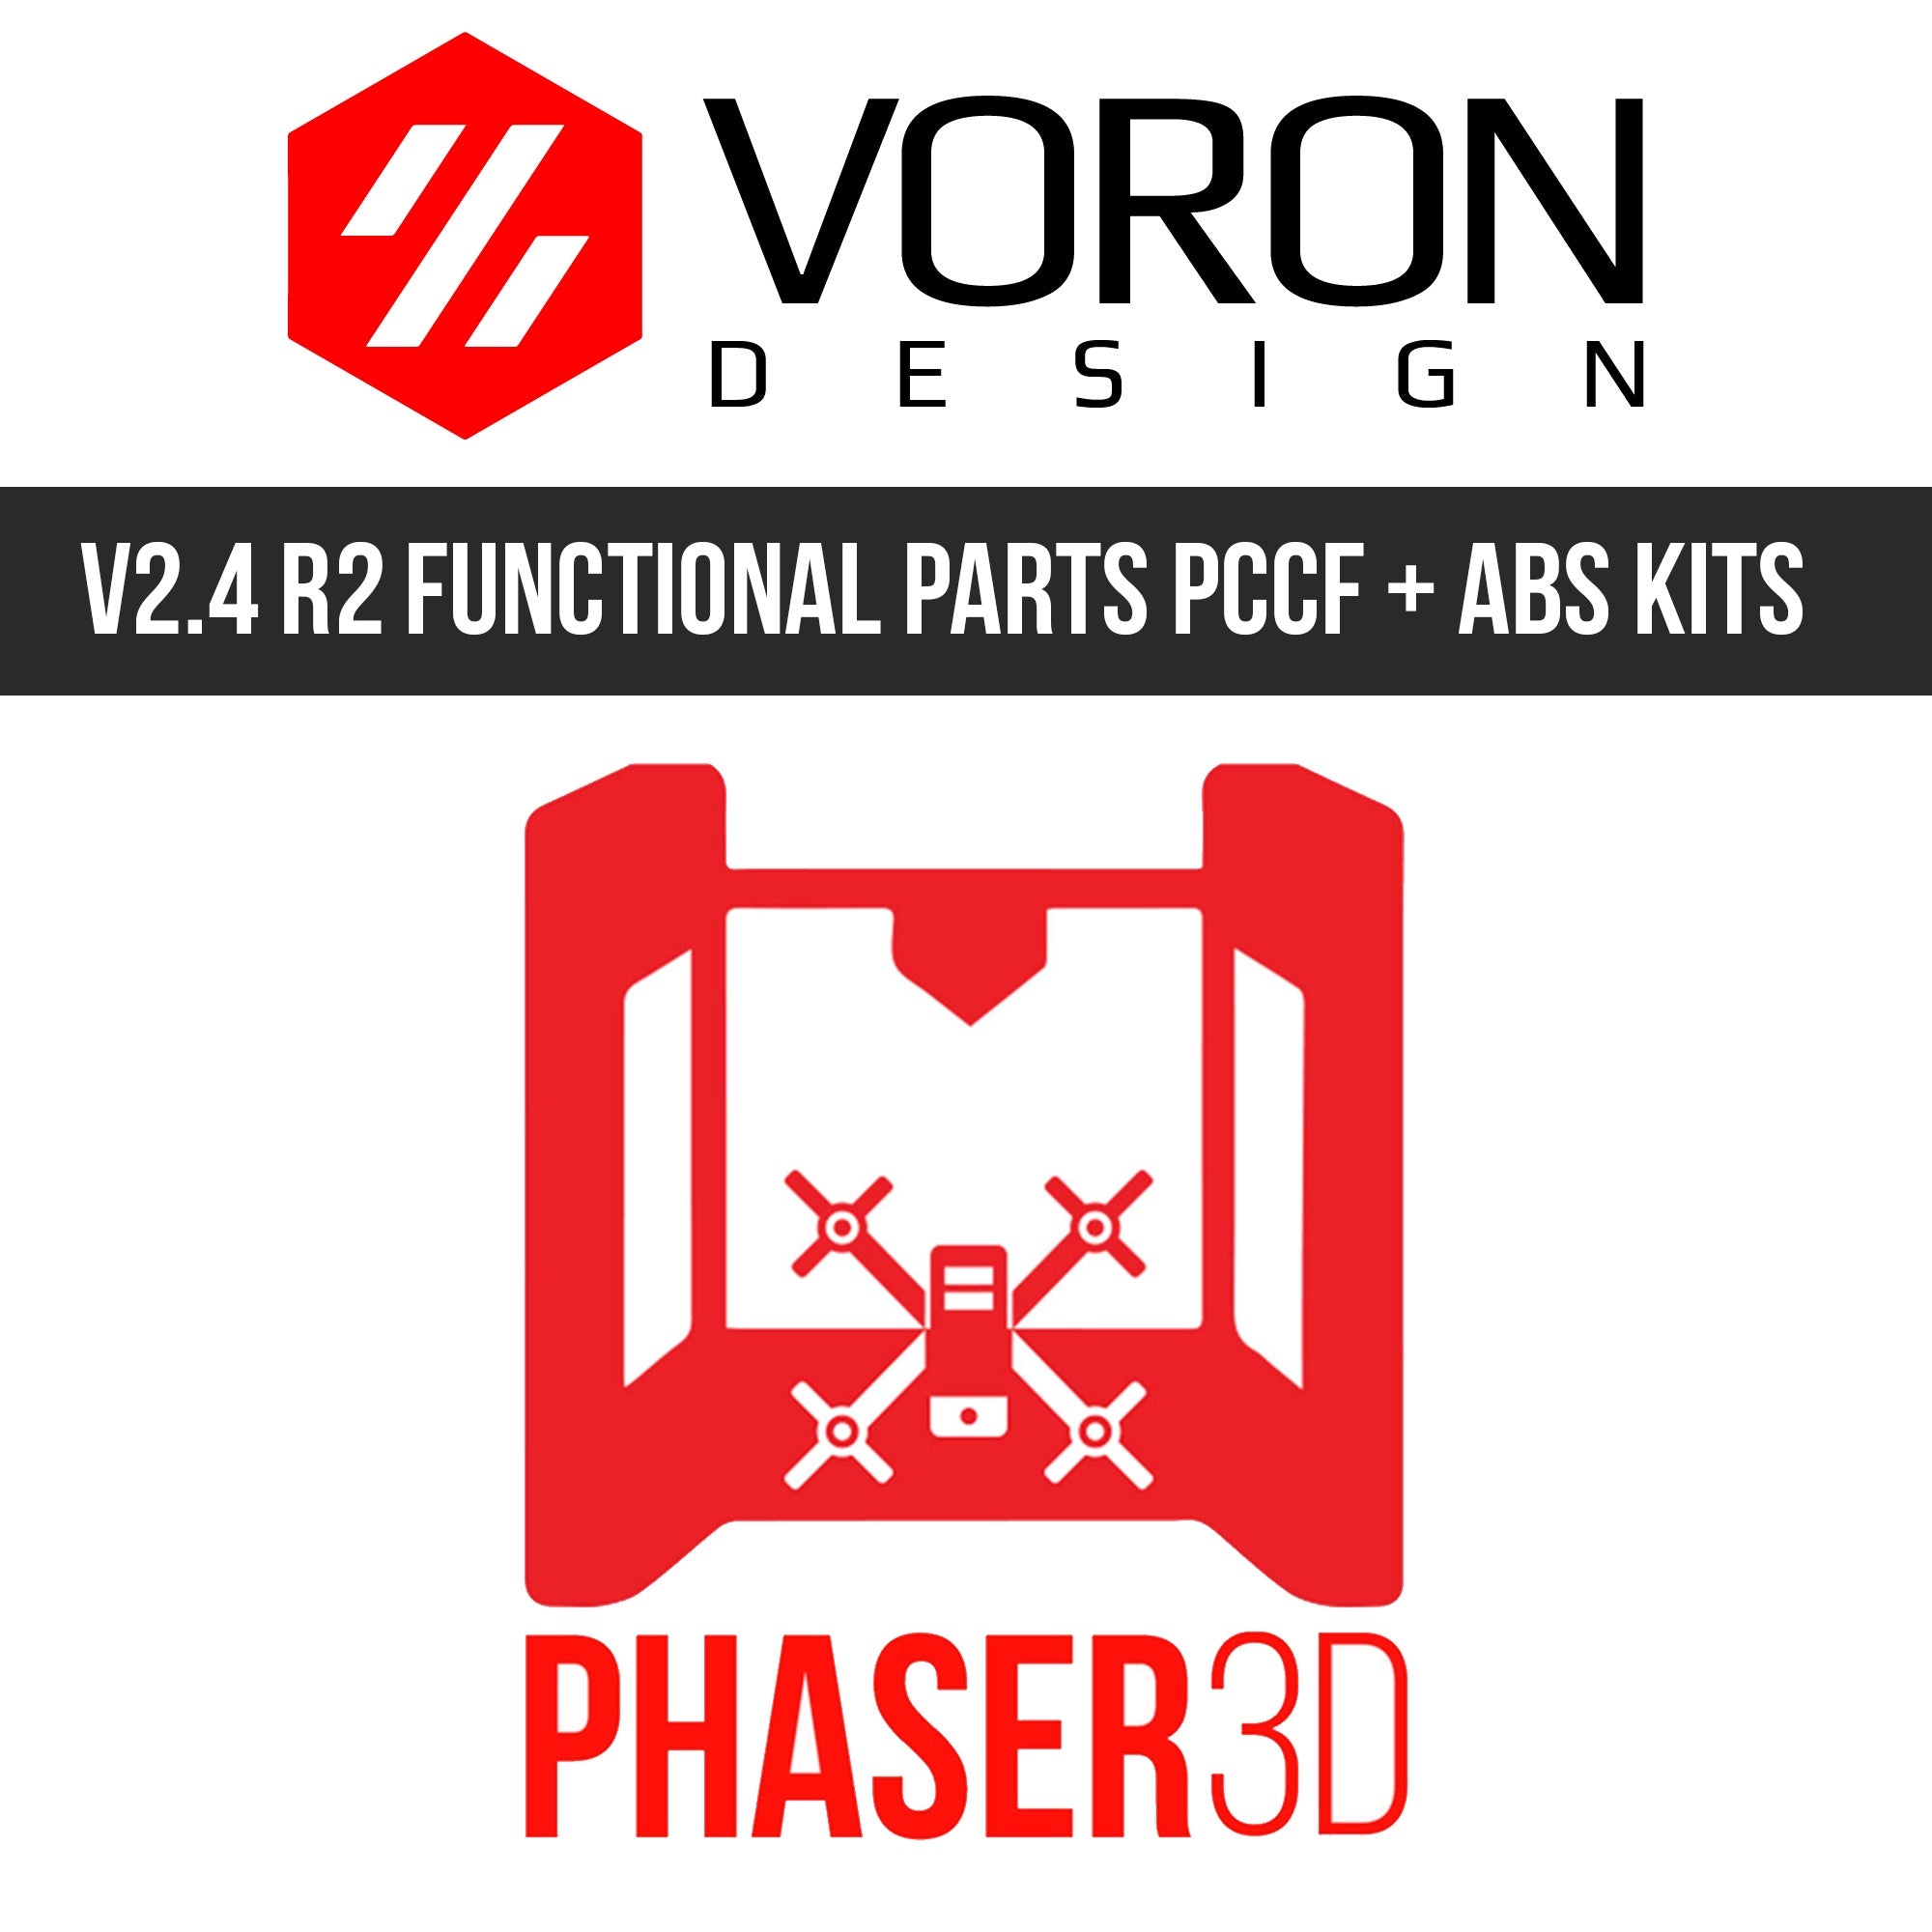 Voron 2.4 R2 Functional Parts Set Printed in Prusament Polycarbonate Carbon Fibre with Fire Engine Red Accents